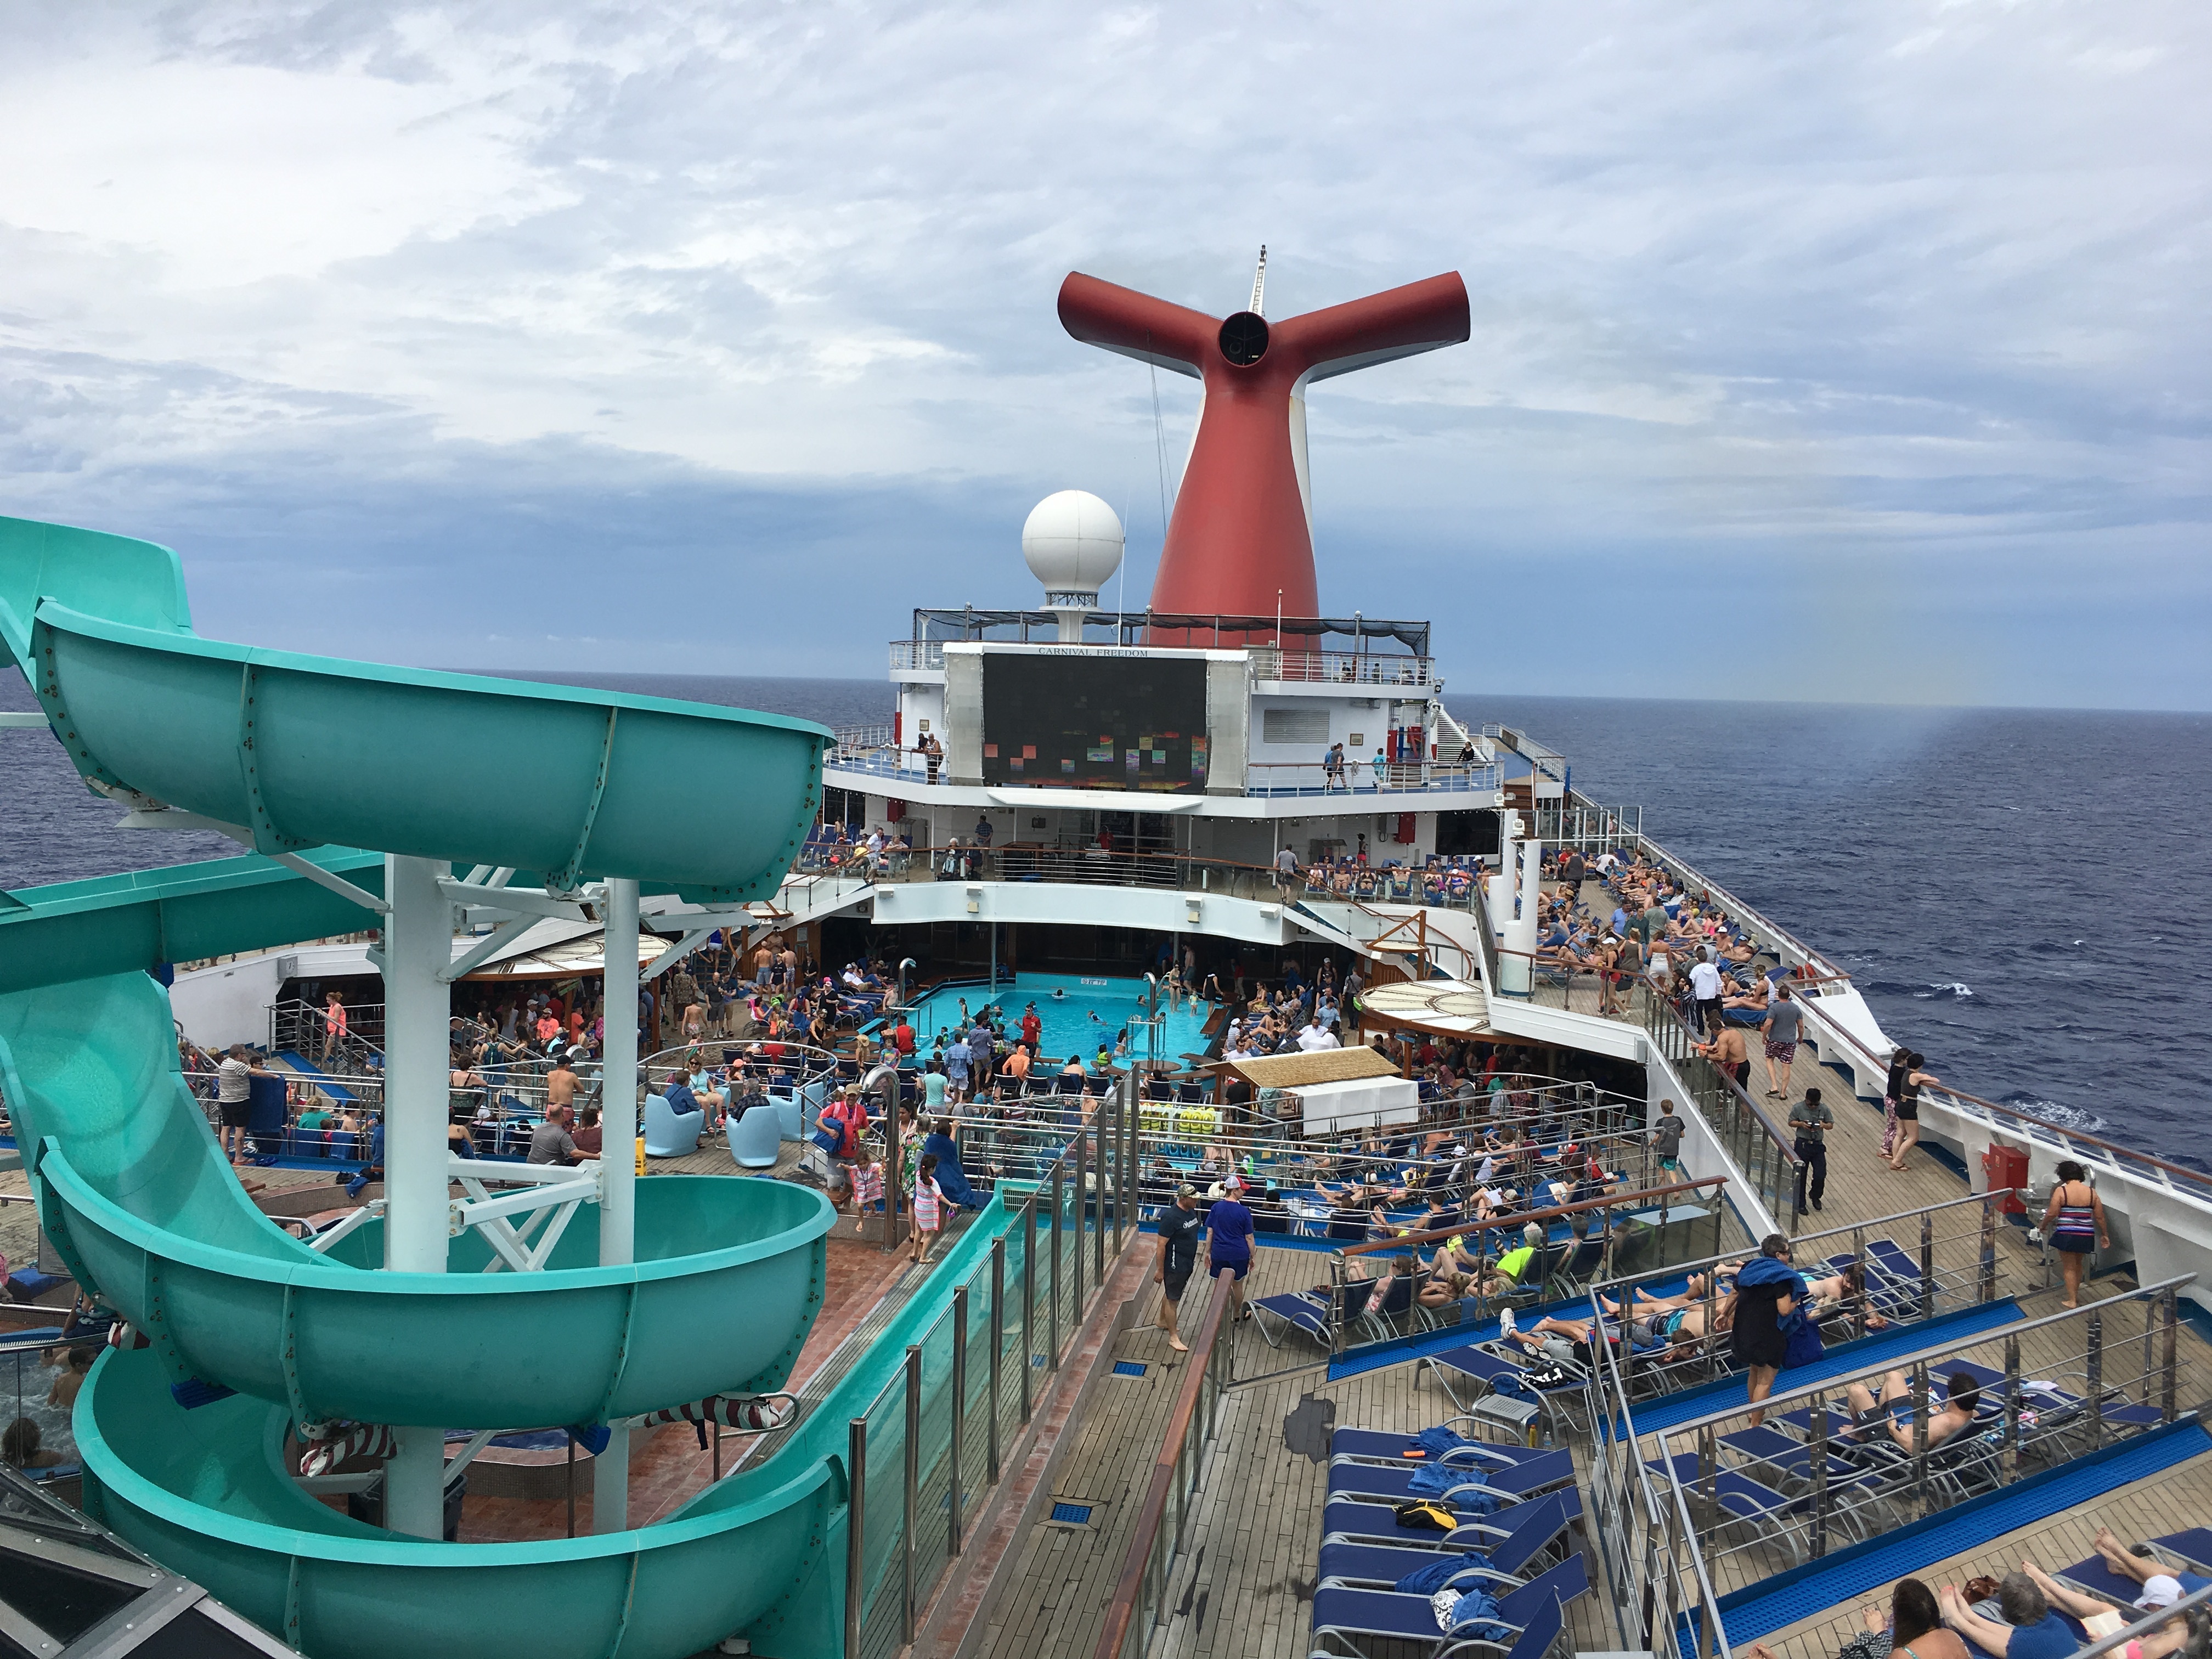 carnival freedom cruise ship reviews